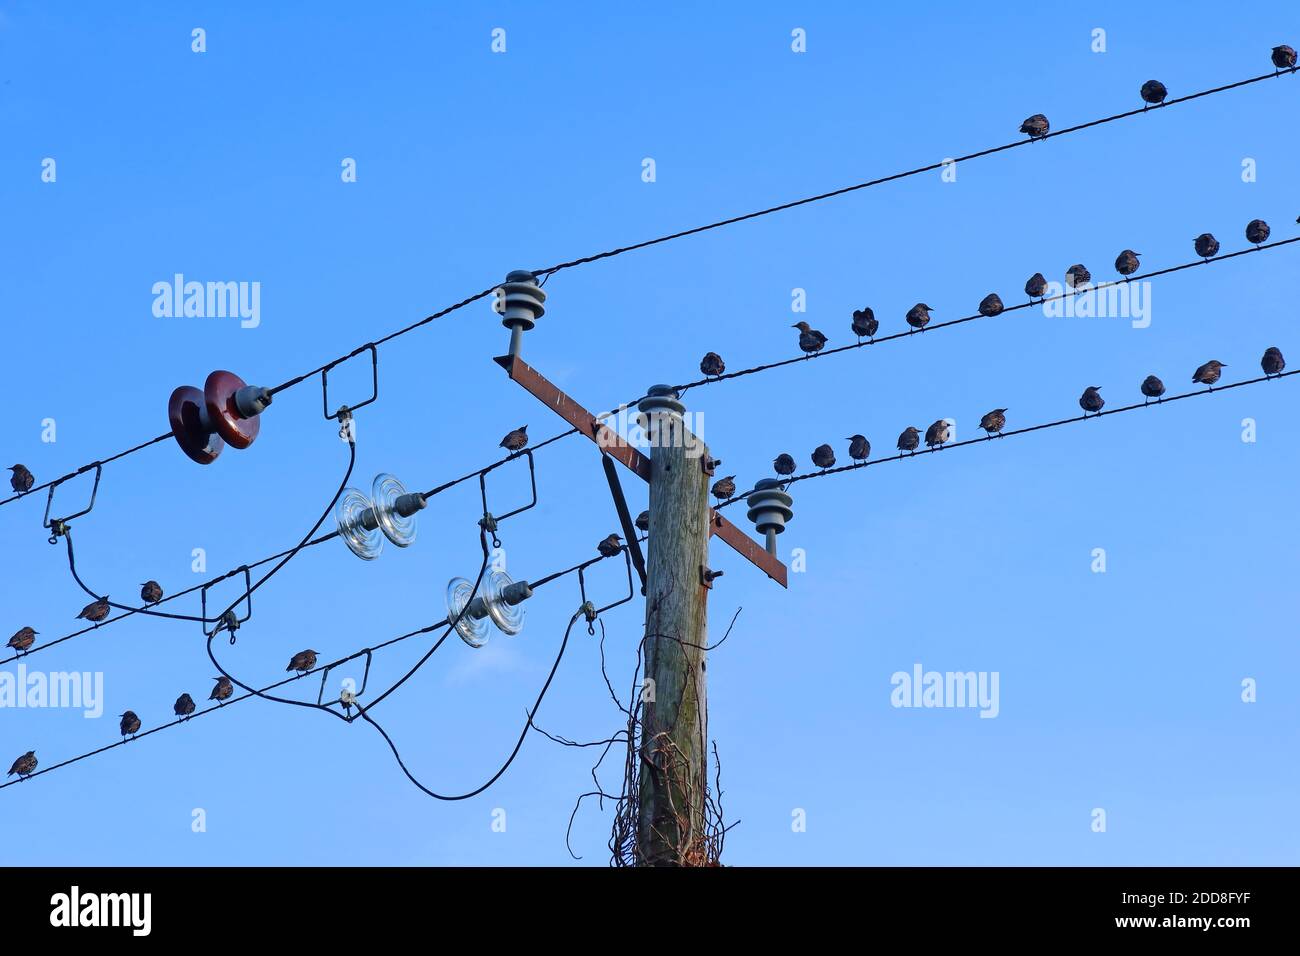 Birds on electrical cables,Great Budworth,Northwich,Cheshire,England,UK Stock Photo